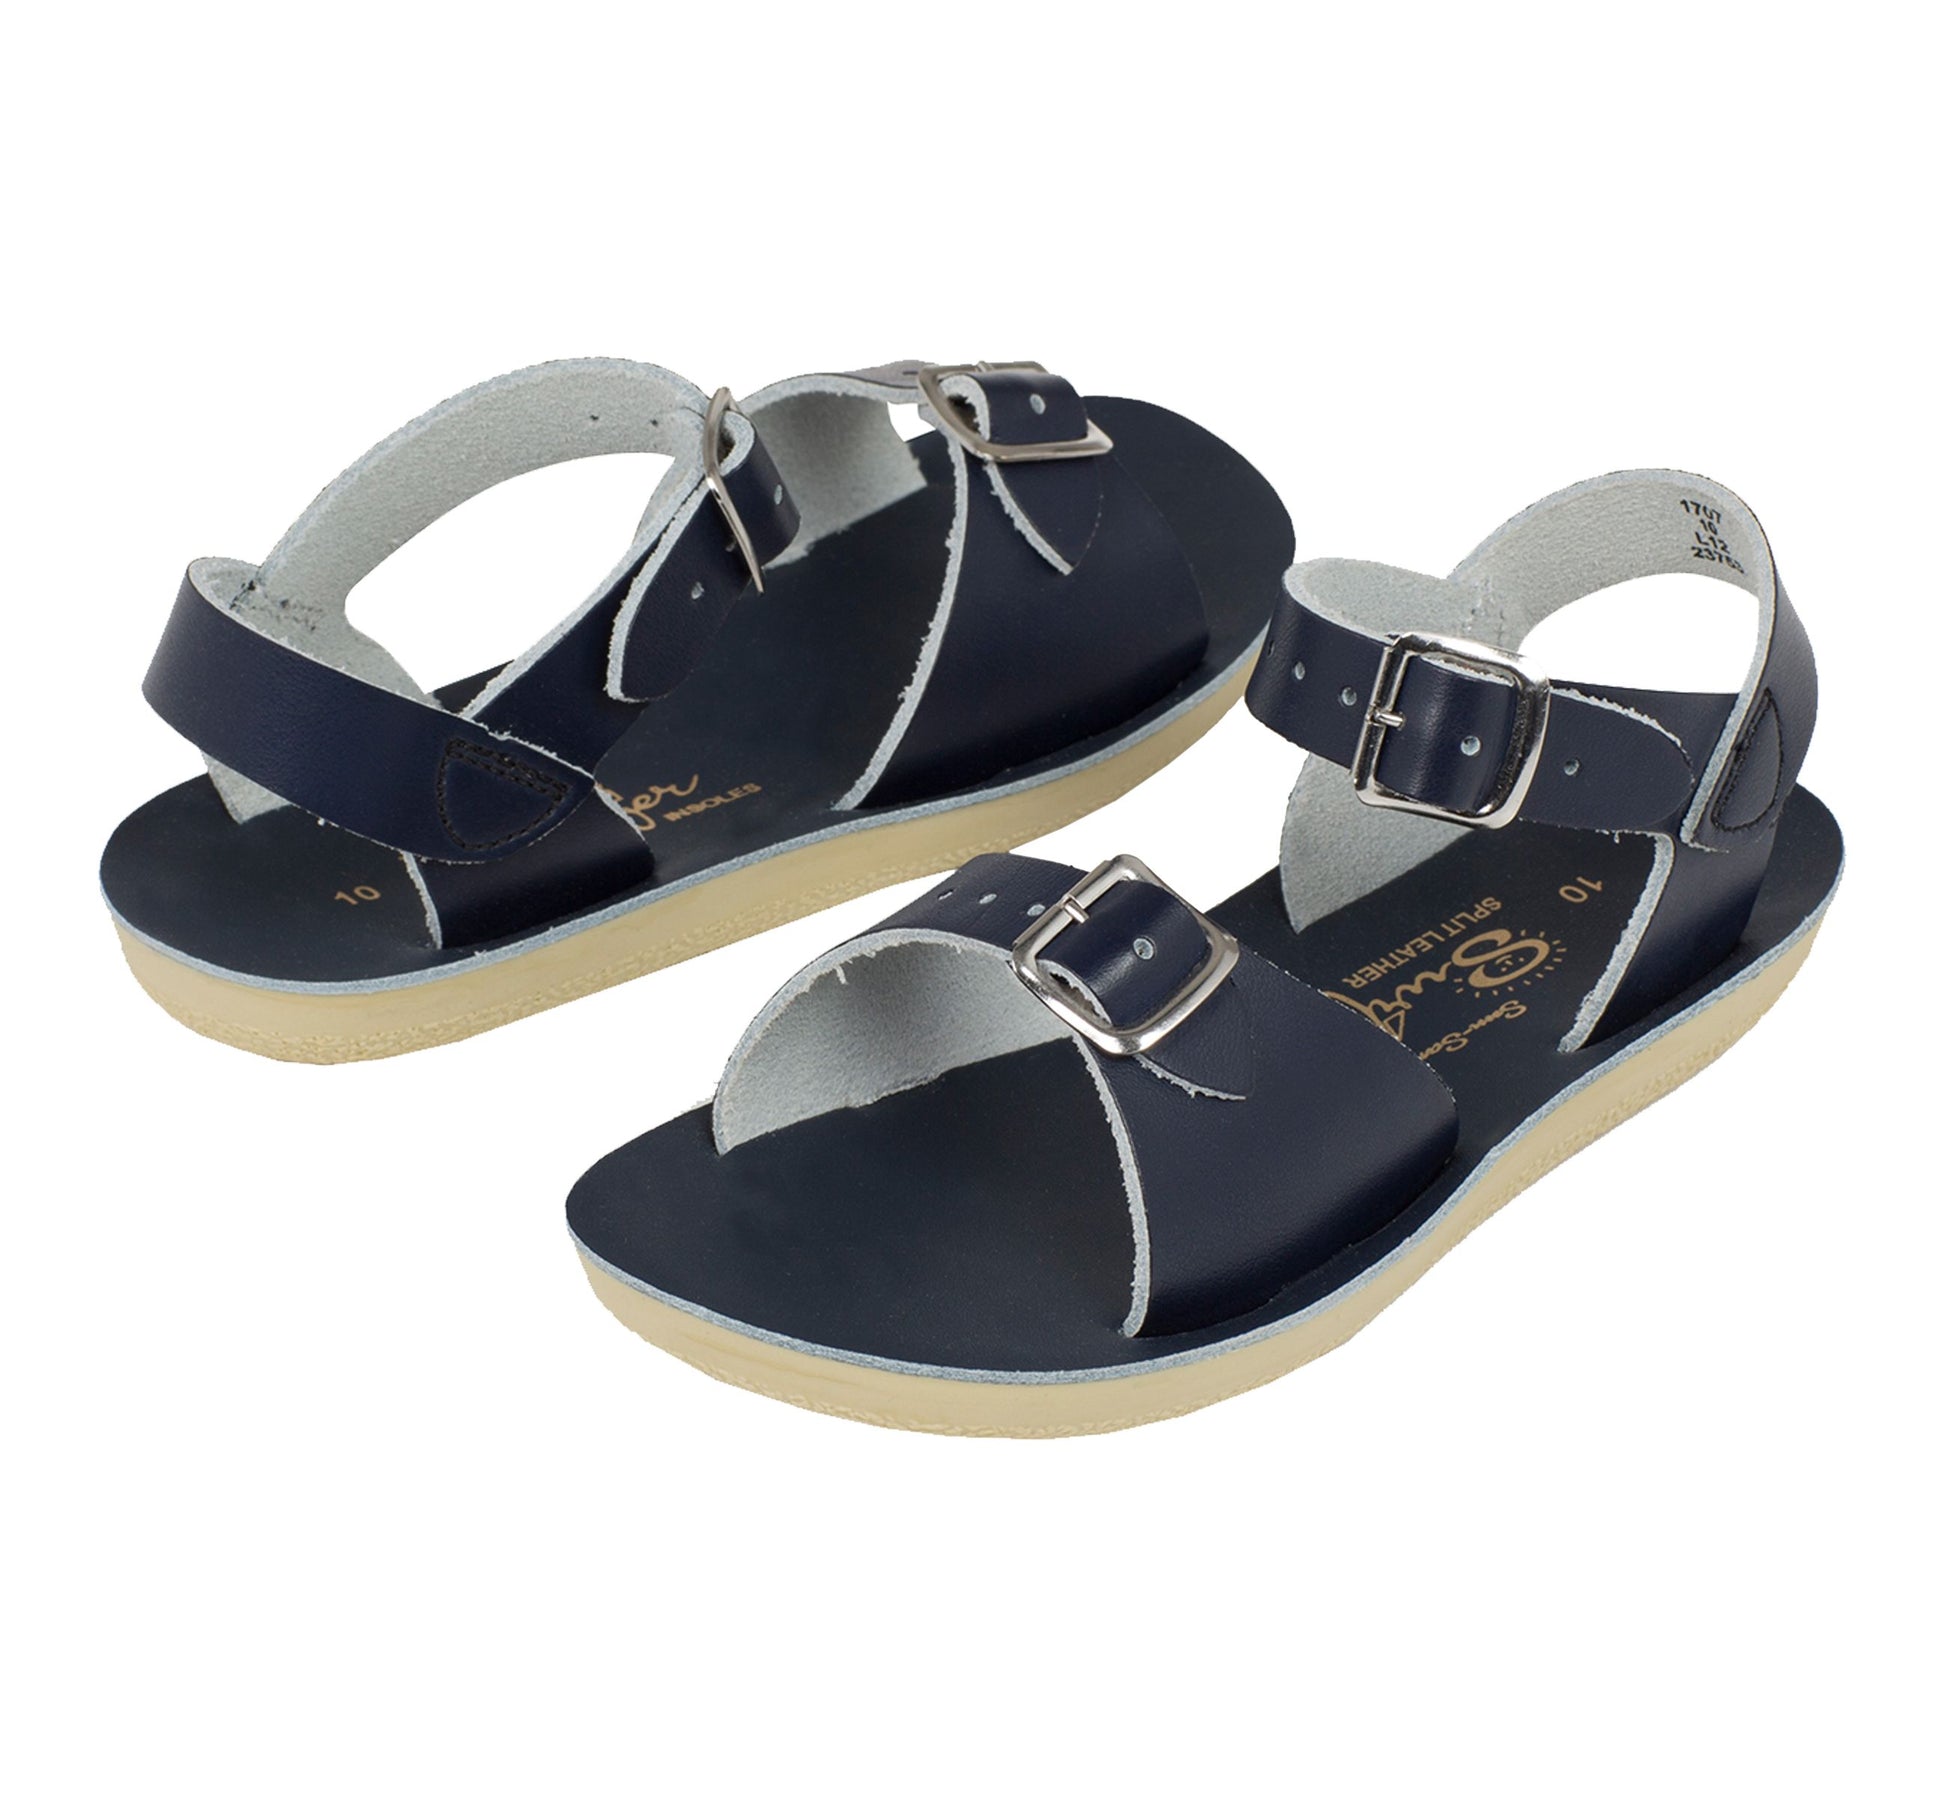 A unisex sandal by Salt Water Sandals in navy with double buckle fastening across the instep and around the ankle. Open Toe and Sling-back. Pair view.